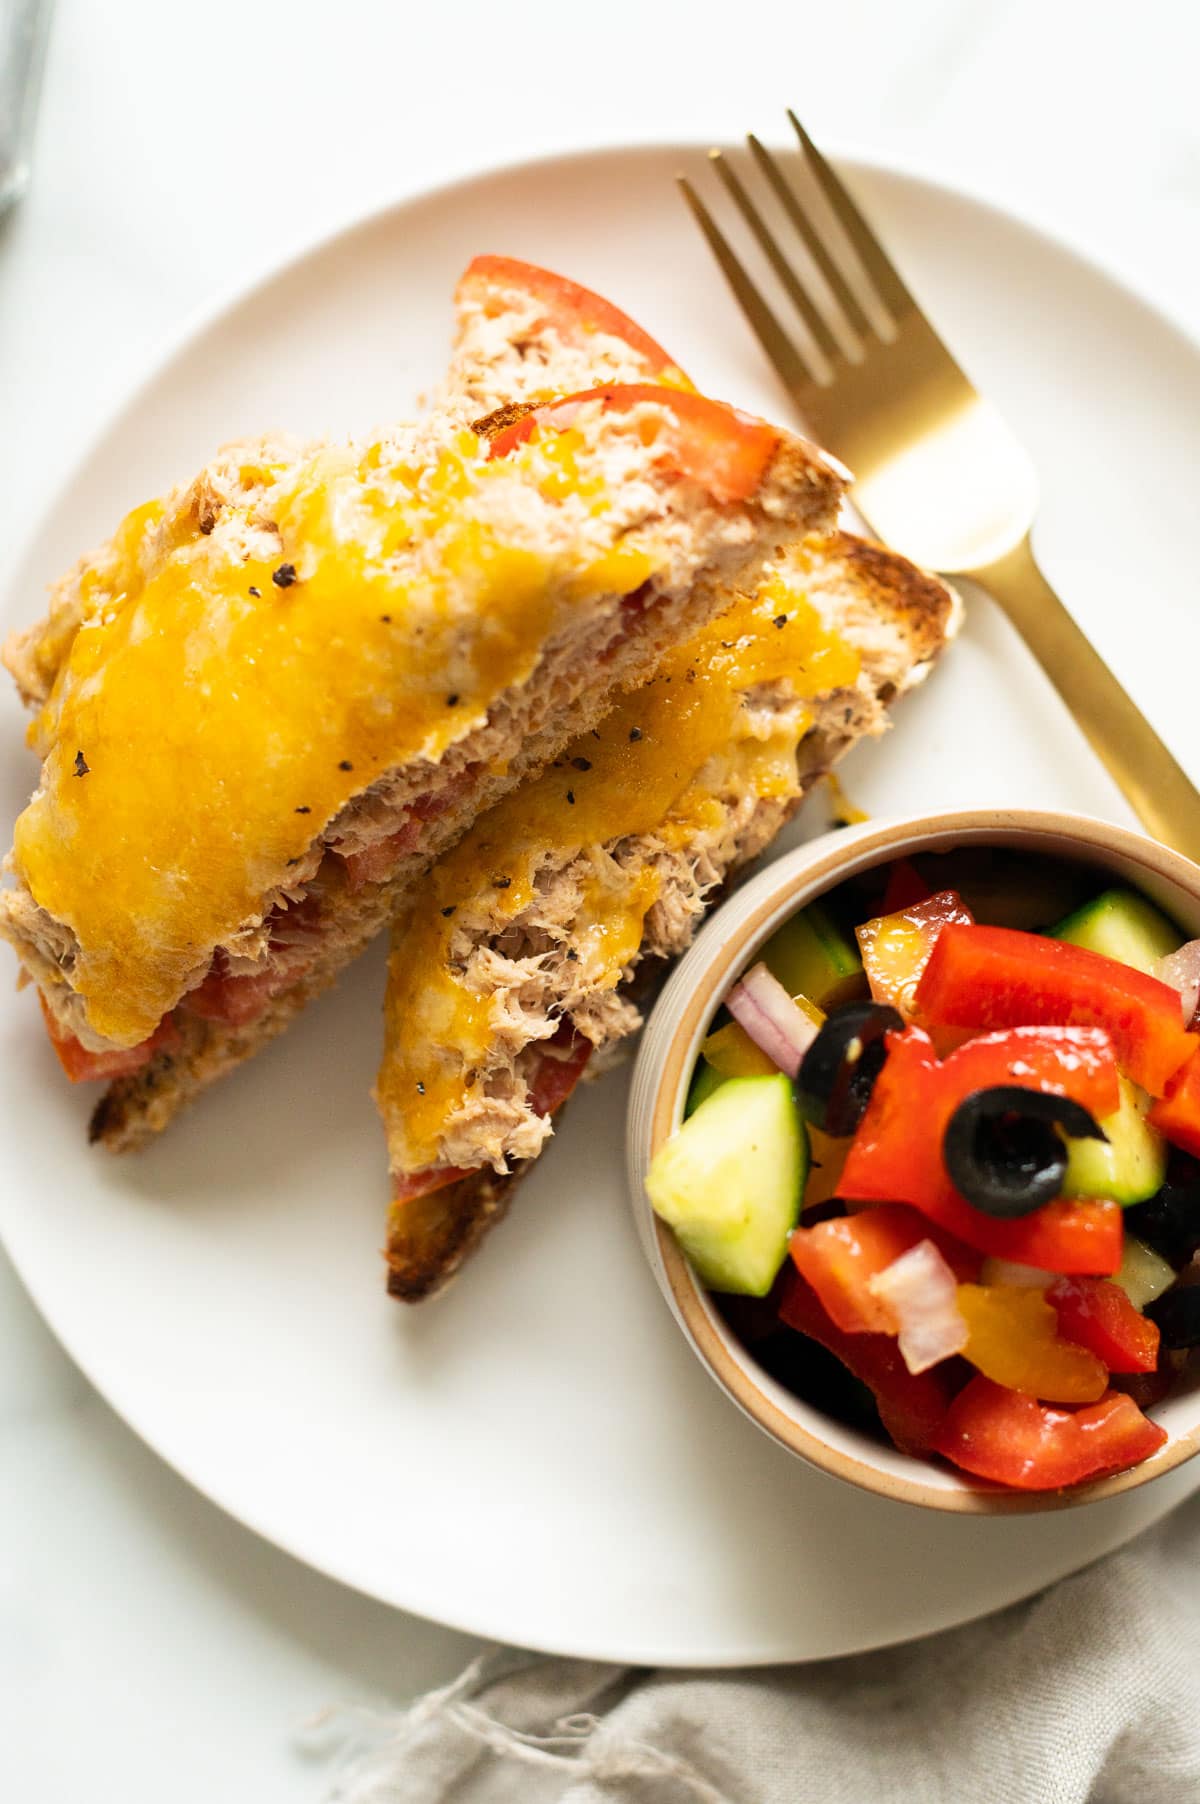 Tuna melt cut in half and served with tomato cucumber bell pepper salad on a plate.